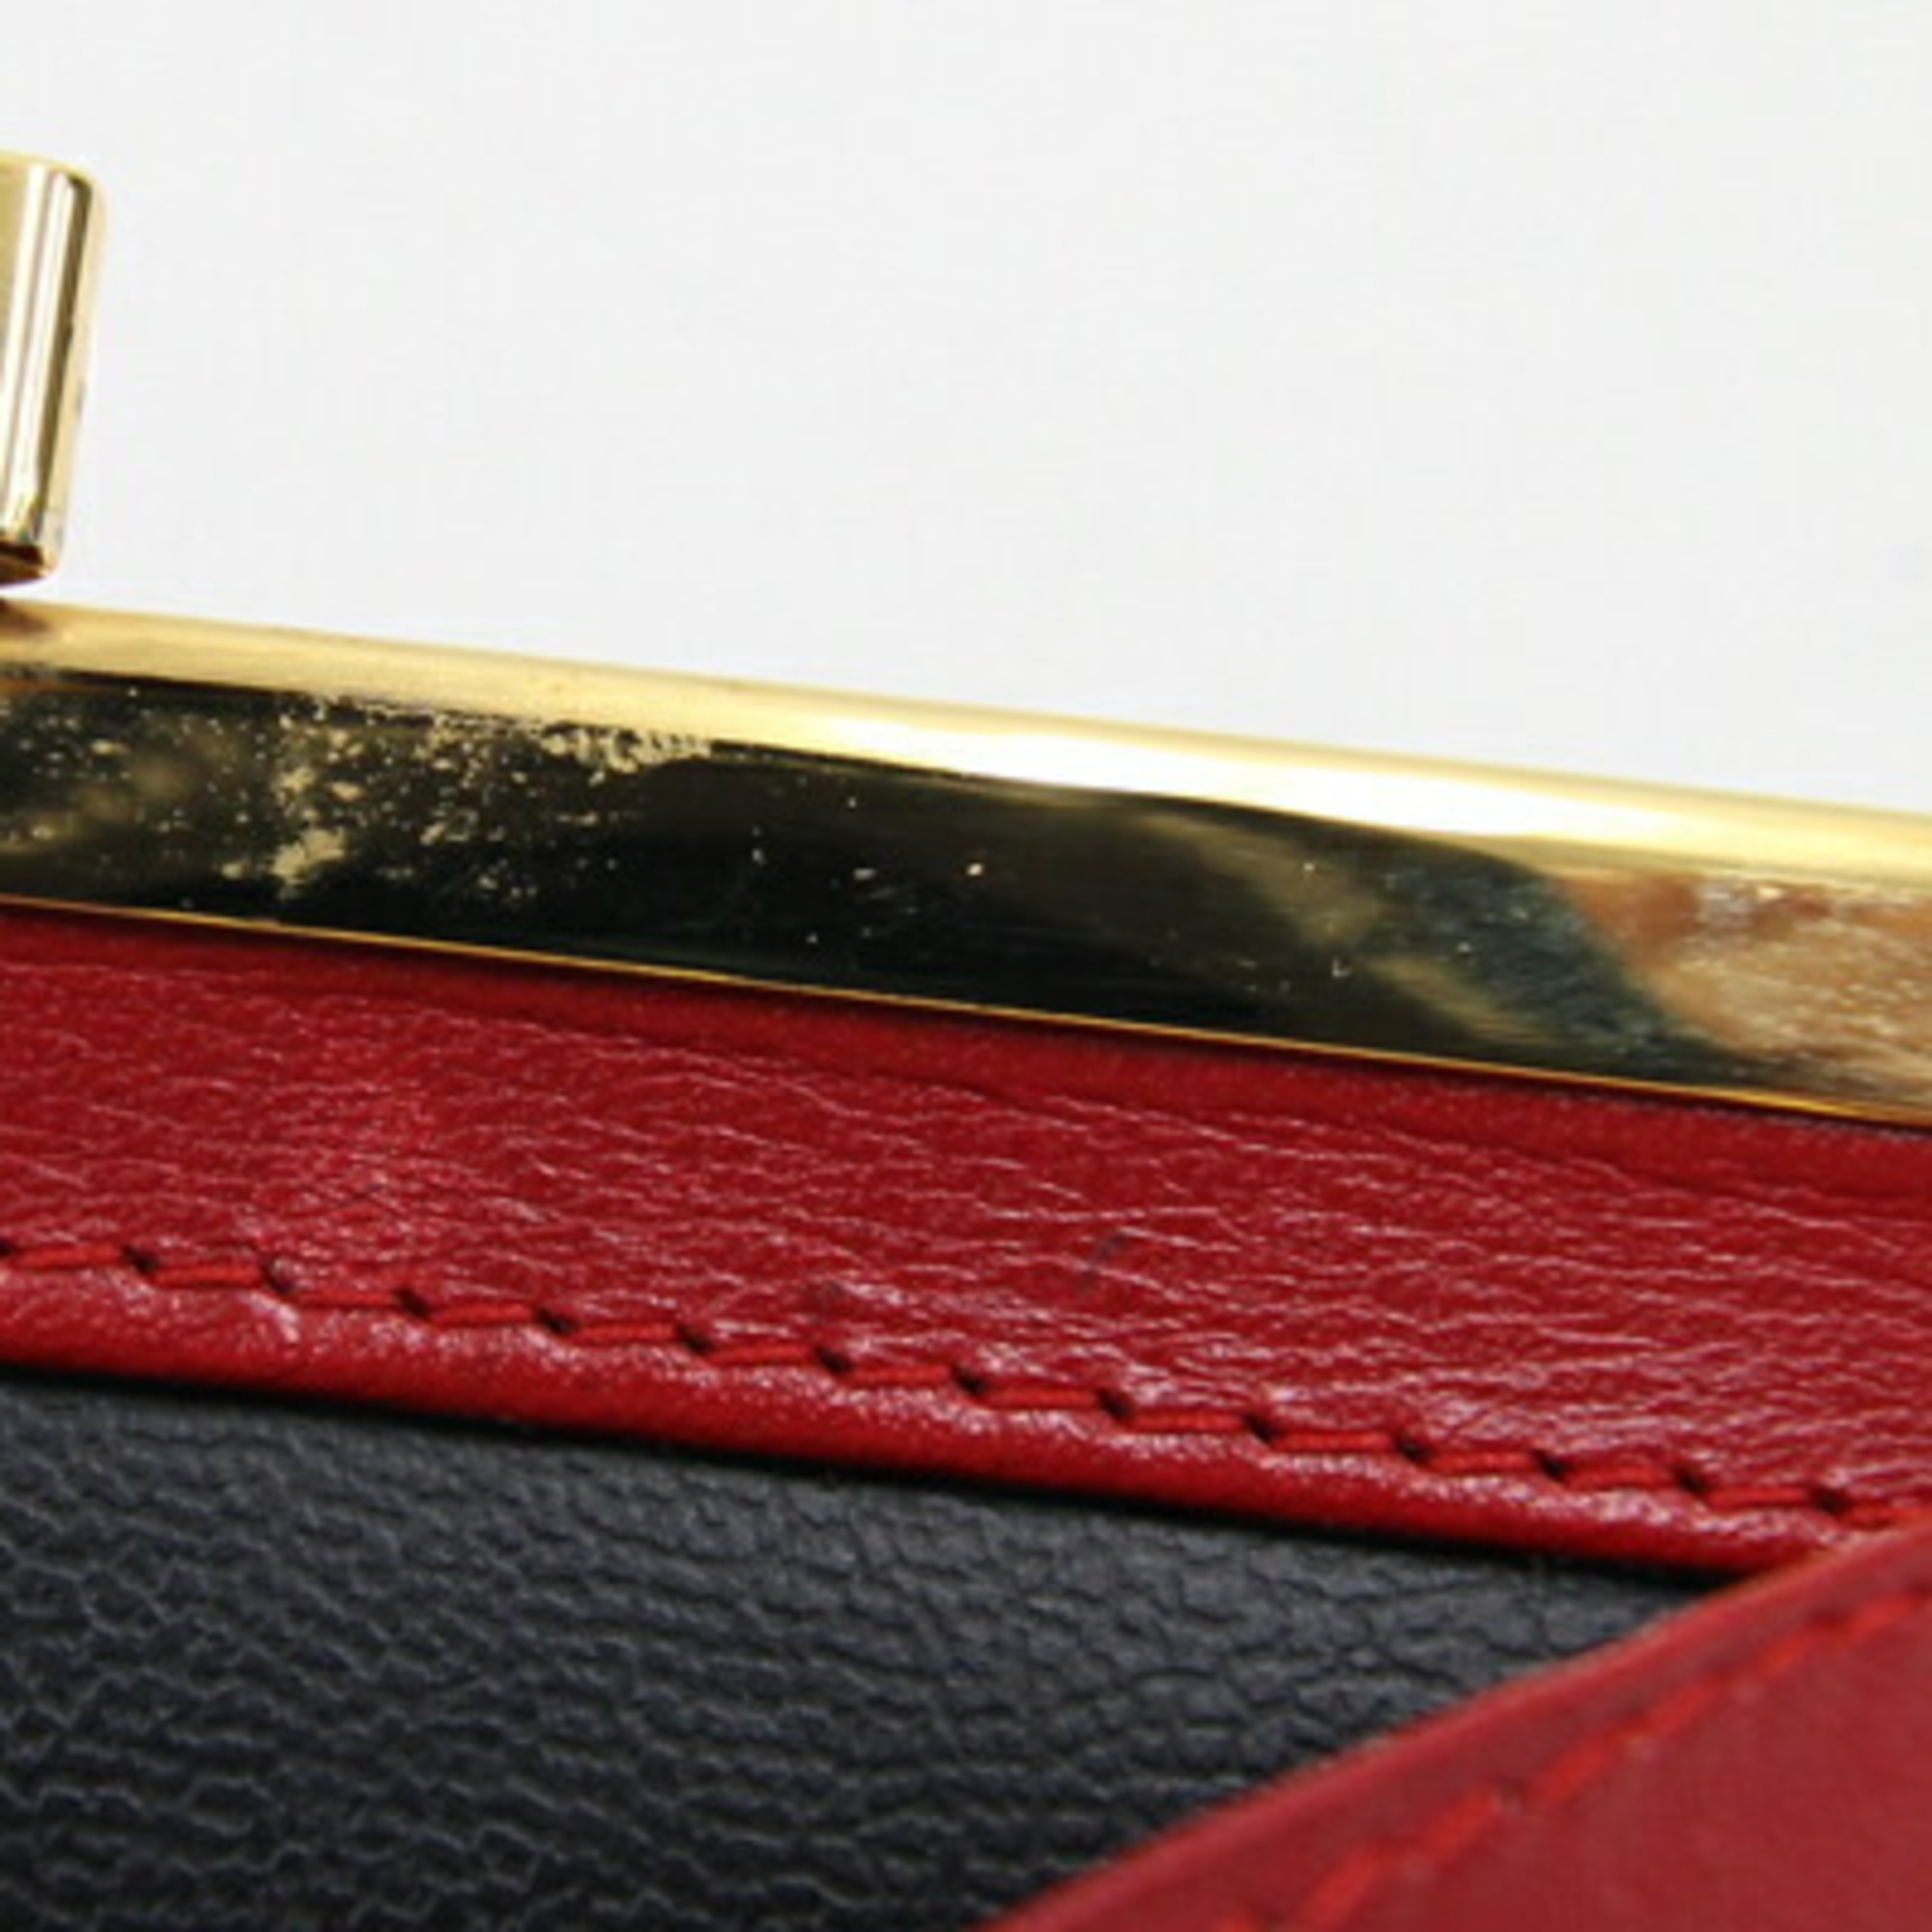 Christian Dior Dior Bi-fold Wallet Red Leather Compact Women's Pattern Old Christian